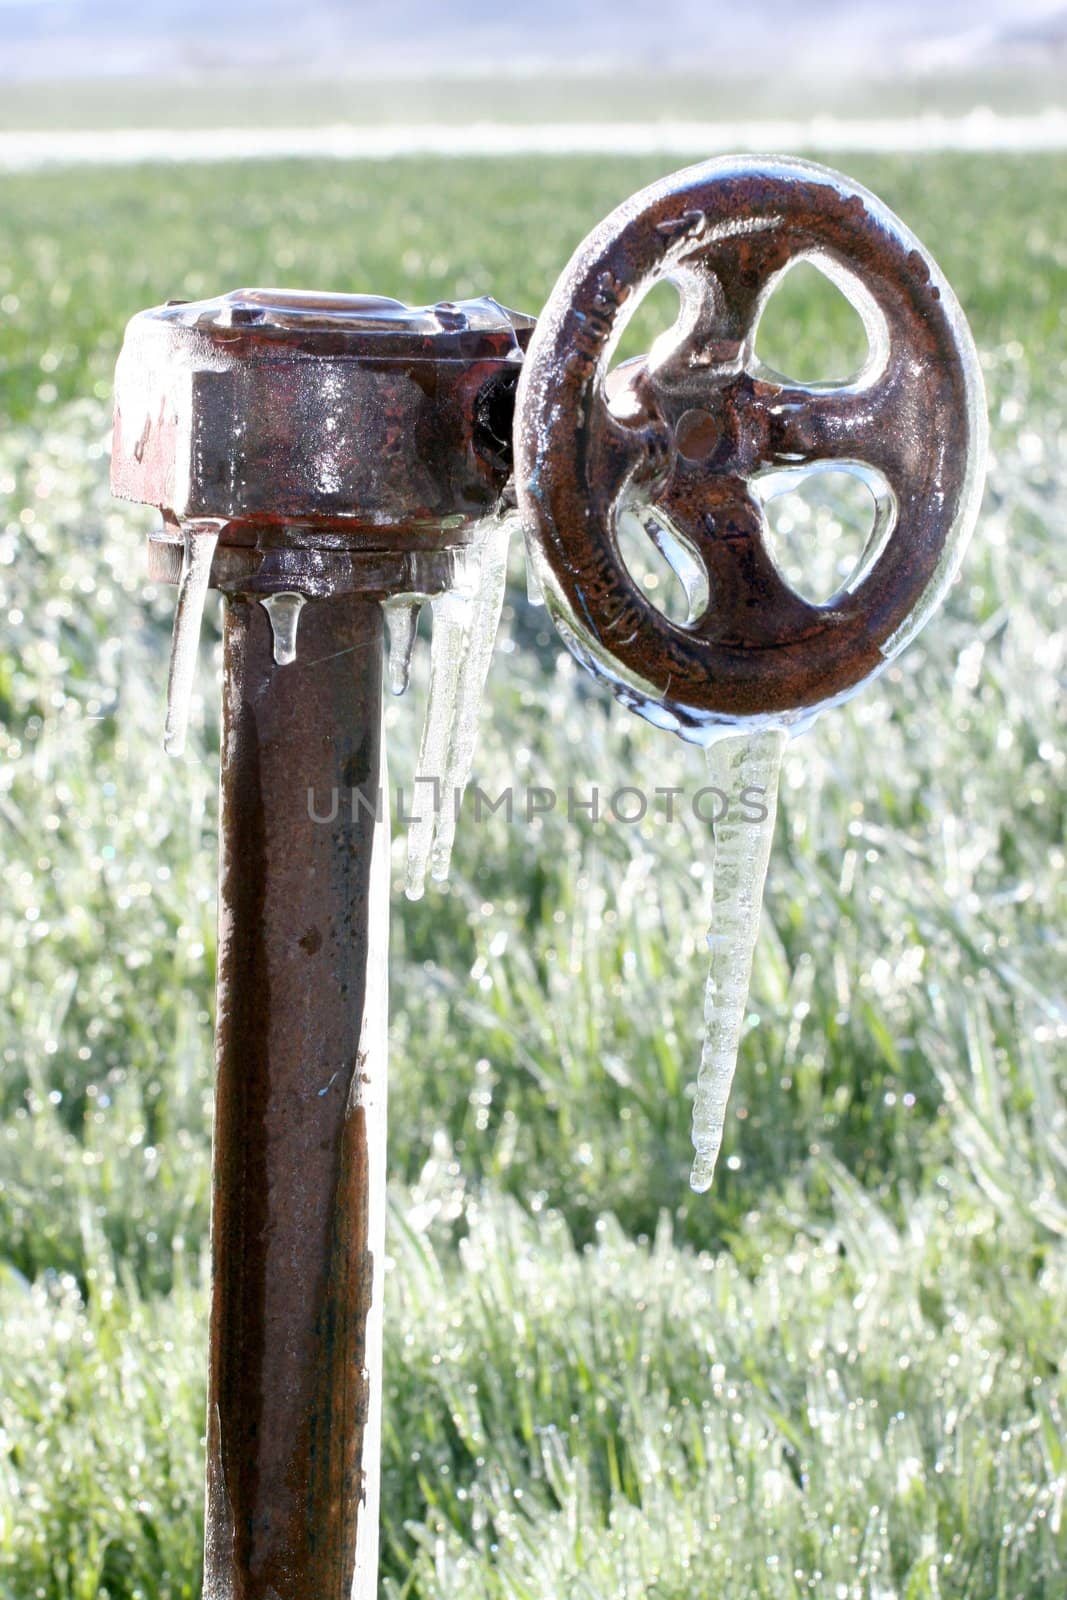 Irrigation valve frozen in early springtime